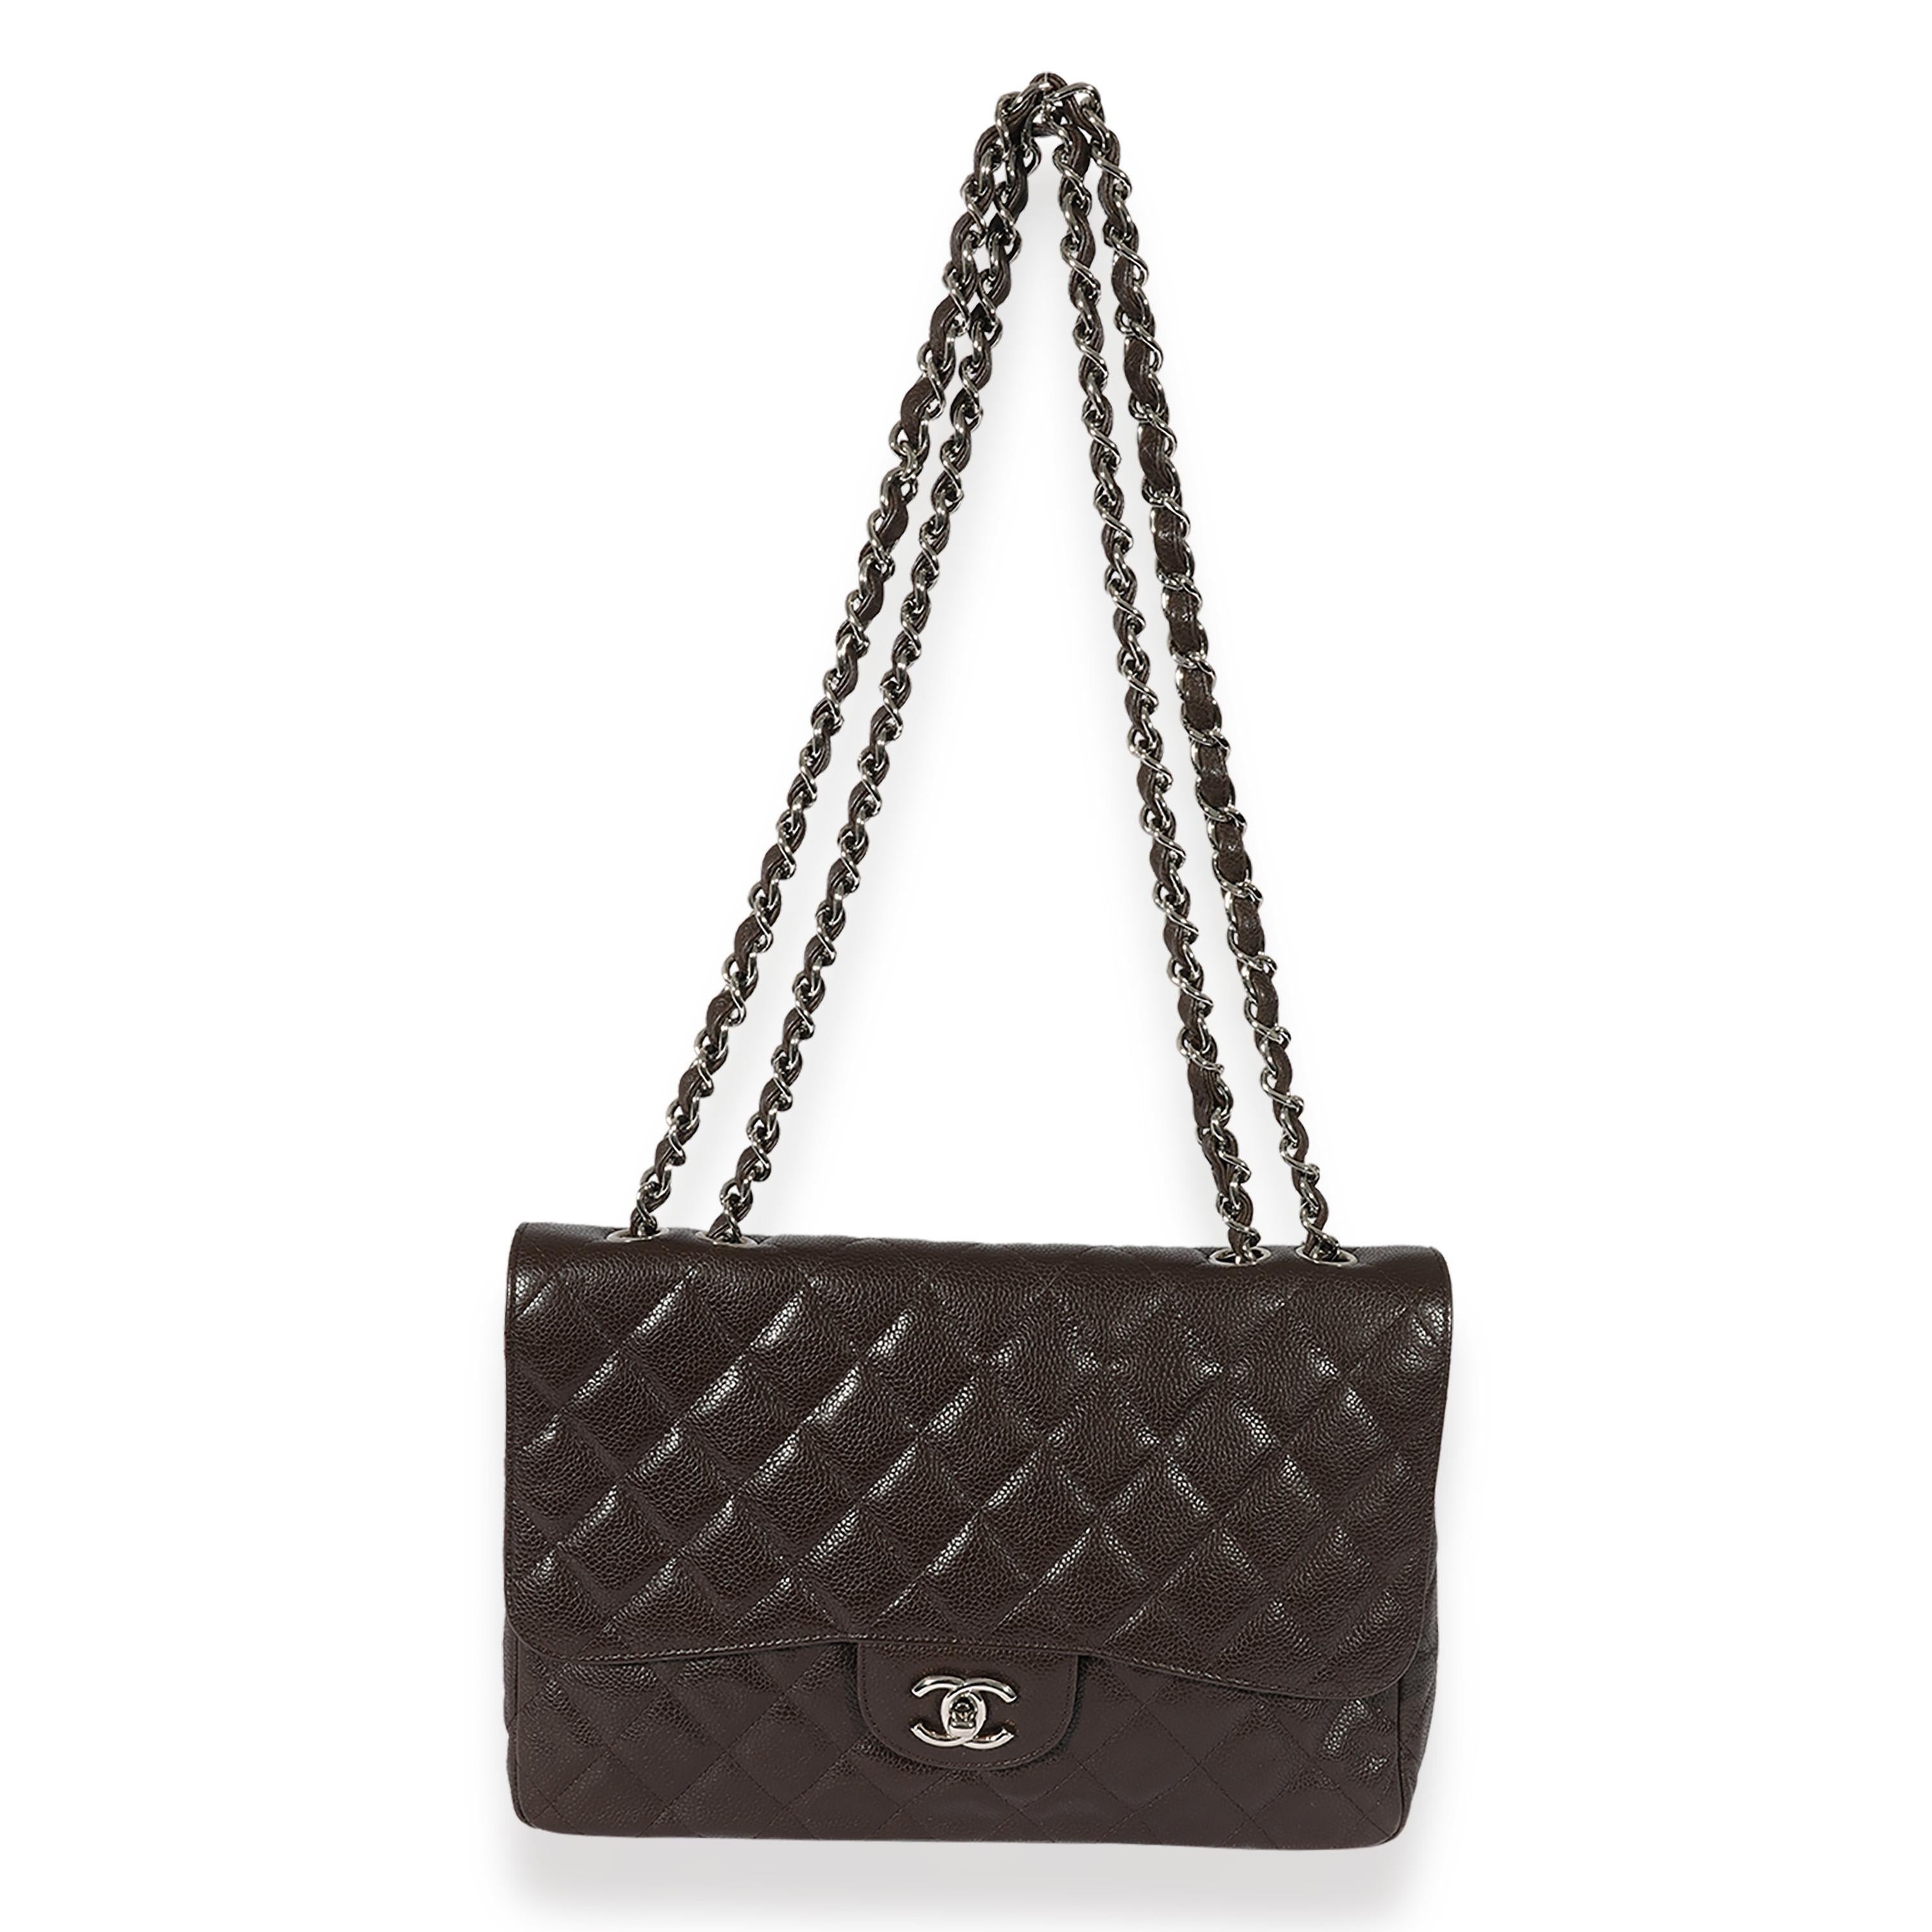 Listing Title: Chanel Brown Quilted Caviar Jumbo Single Flap Bag
SKU: 126313
MSRP: 9500.00
Condition: Pre-owned 
Condition Description: A timeless classic that never goes out of style, the flap bag from Chanel dates back to 1955 and has seen a